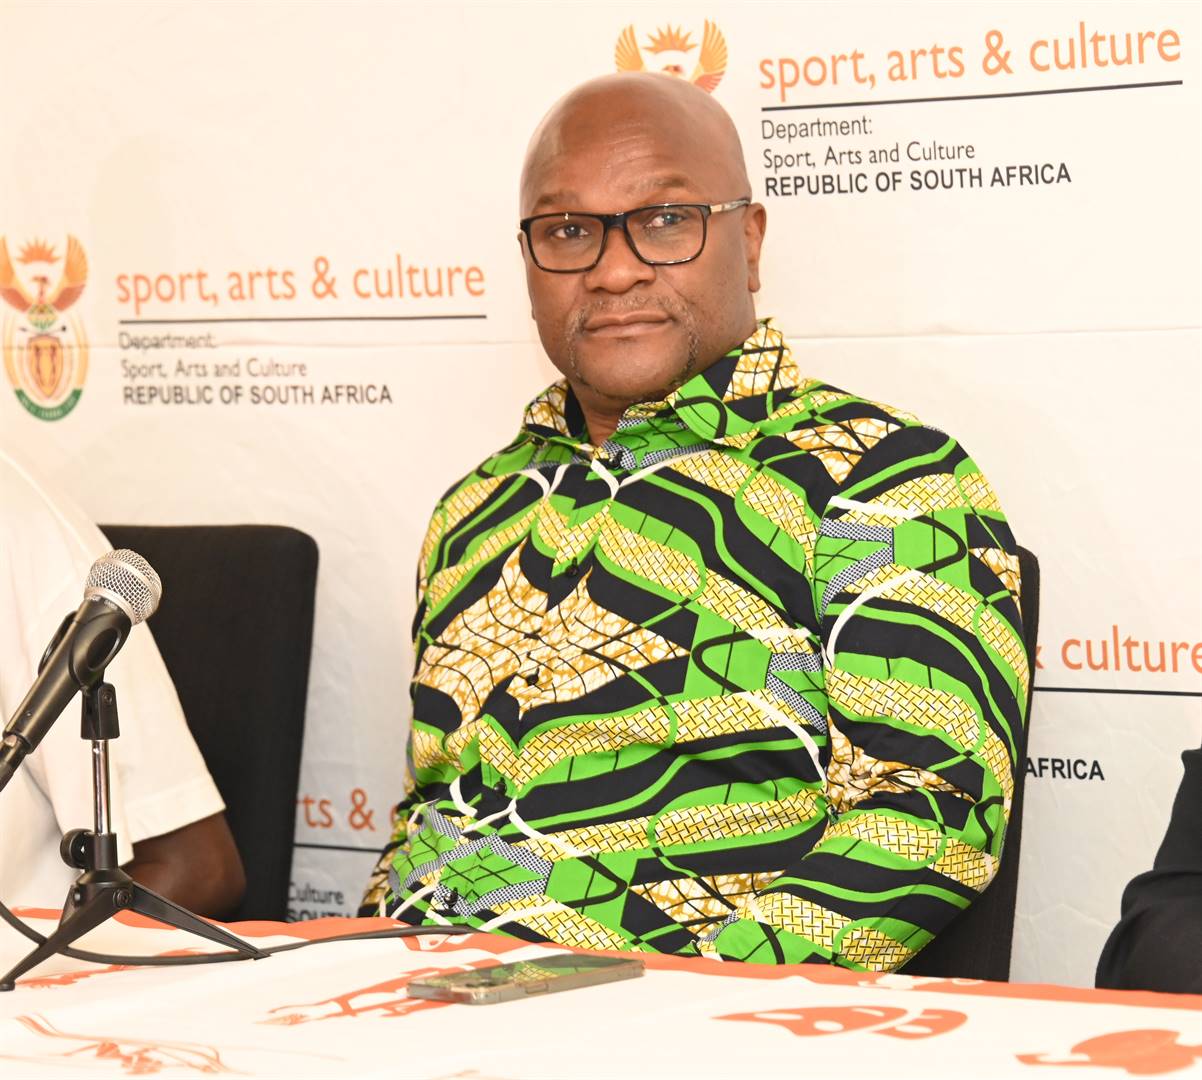 The project in question is the Silapha Wellness Intervention Programme, which was introduced by former sport, arts and culture minister Nathi Mthethwa in February 2021.